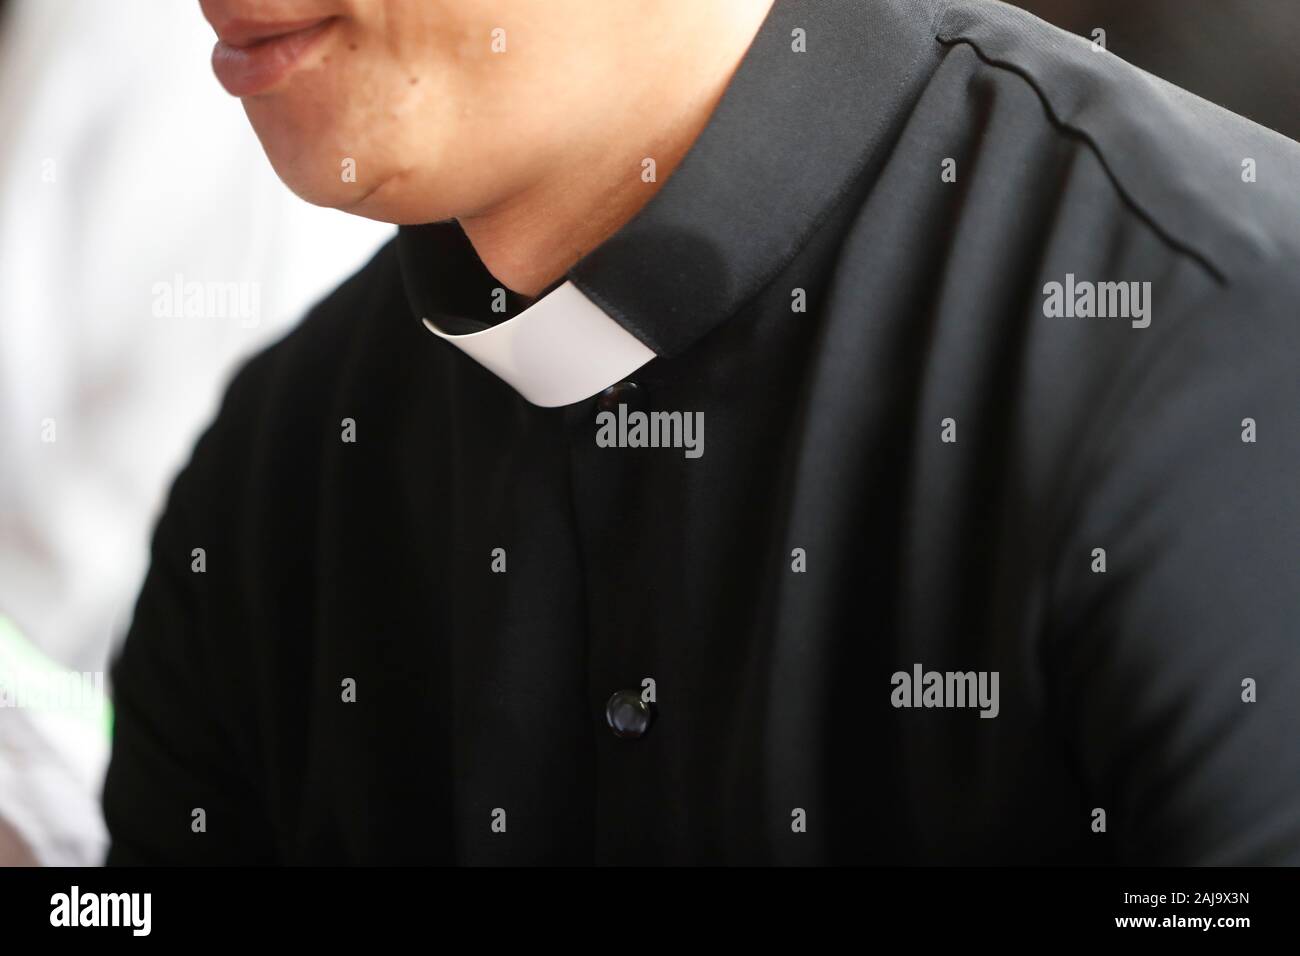 Priest wearing clerical shirt with a tab collar Stock Photo